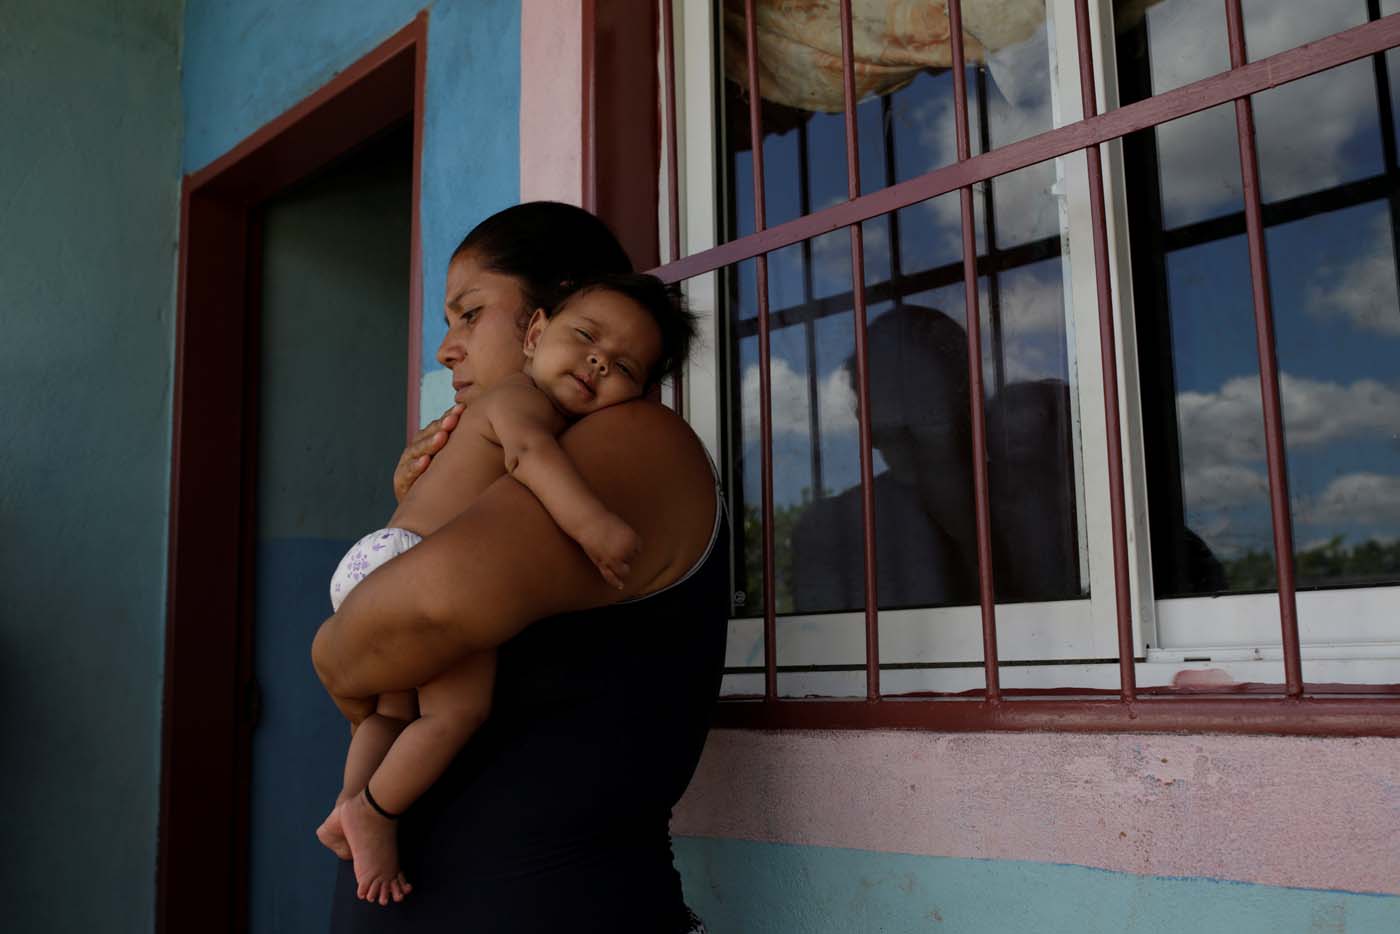 Jennifer Vivas, mother of Eliannys Vivas, who died from diphtheria, carries her baby at the front porch of her home in Pariaguan, Venezuela January 26, 2017. Picture taken January 26, 2017. REUTERS/Marco Bello